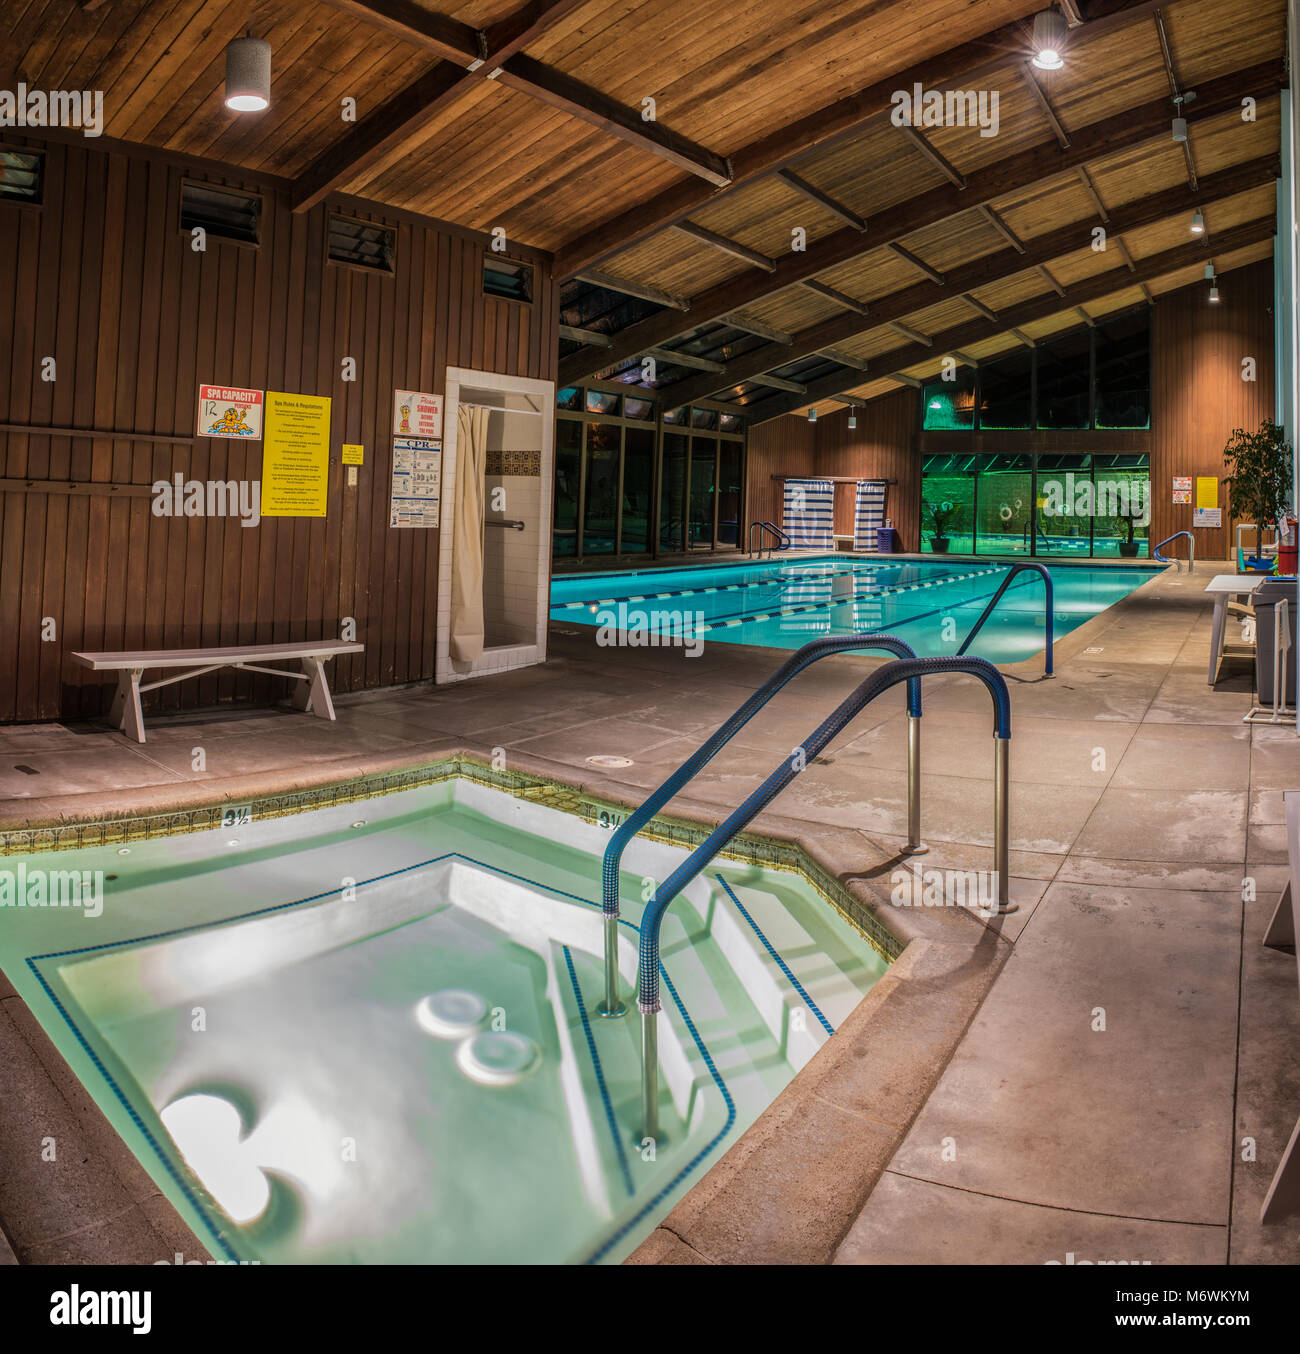 Jacuzzi, therapy pool, and further back, the lap pool of the Pierpont Racquet Club under morning lights in Ventura, California on March 6, 2018 in Uni Stock Photo